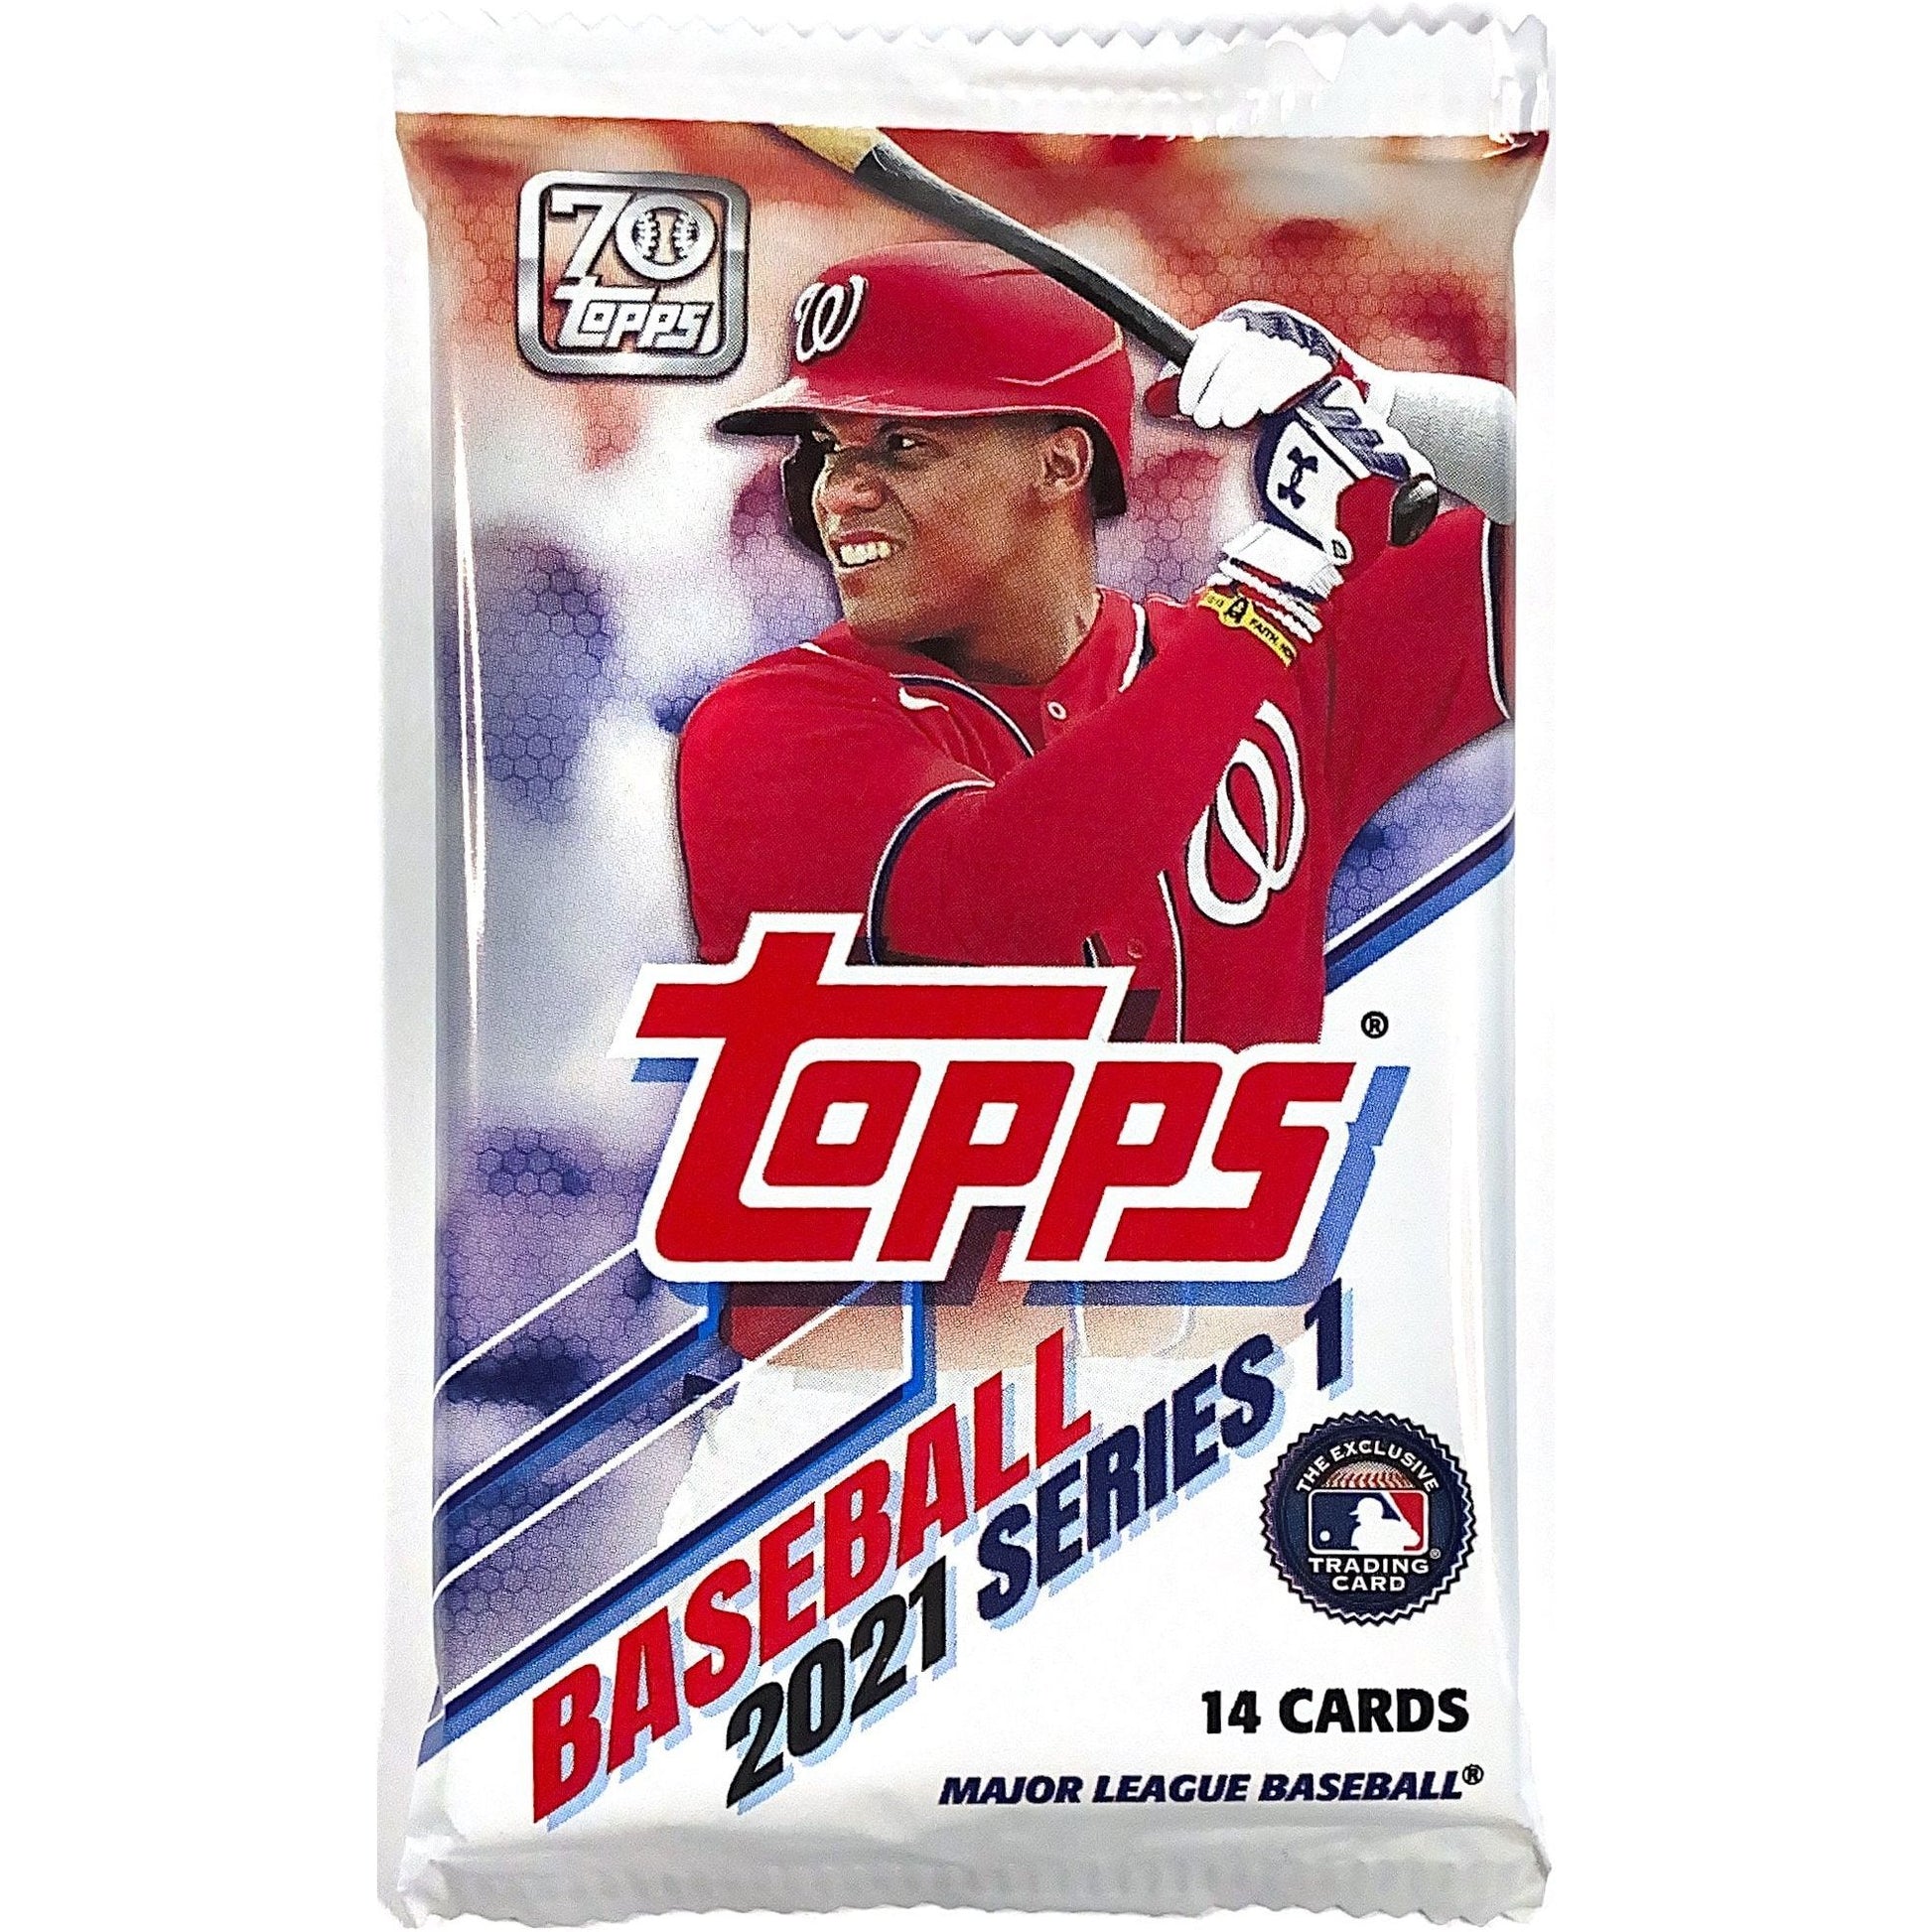  2021 Topps Baseball Series 1 Retail Pack  Local Legends Cards & Collectibles